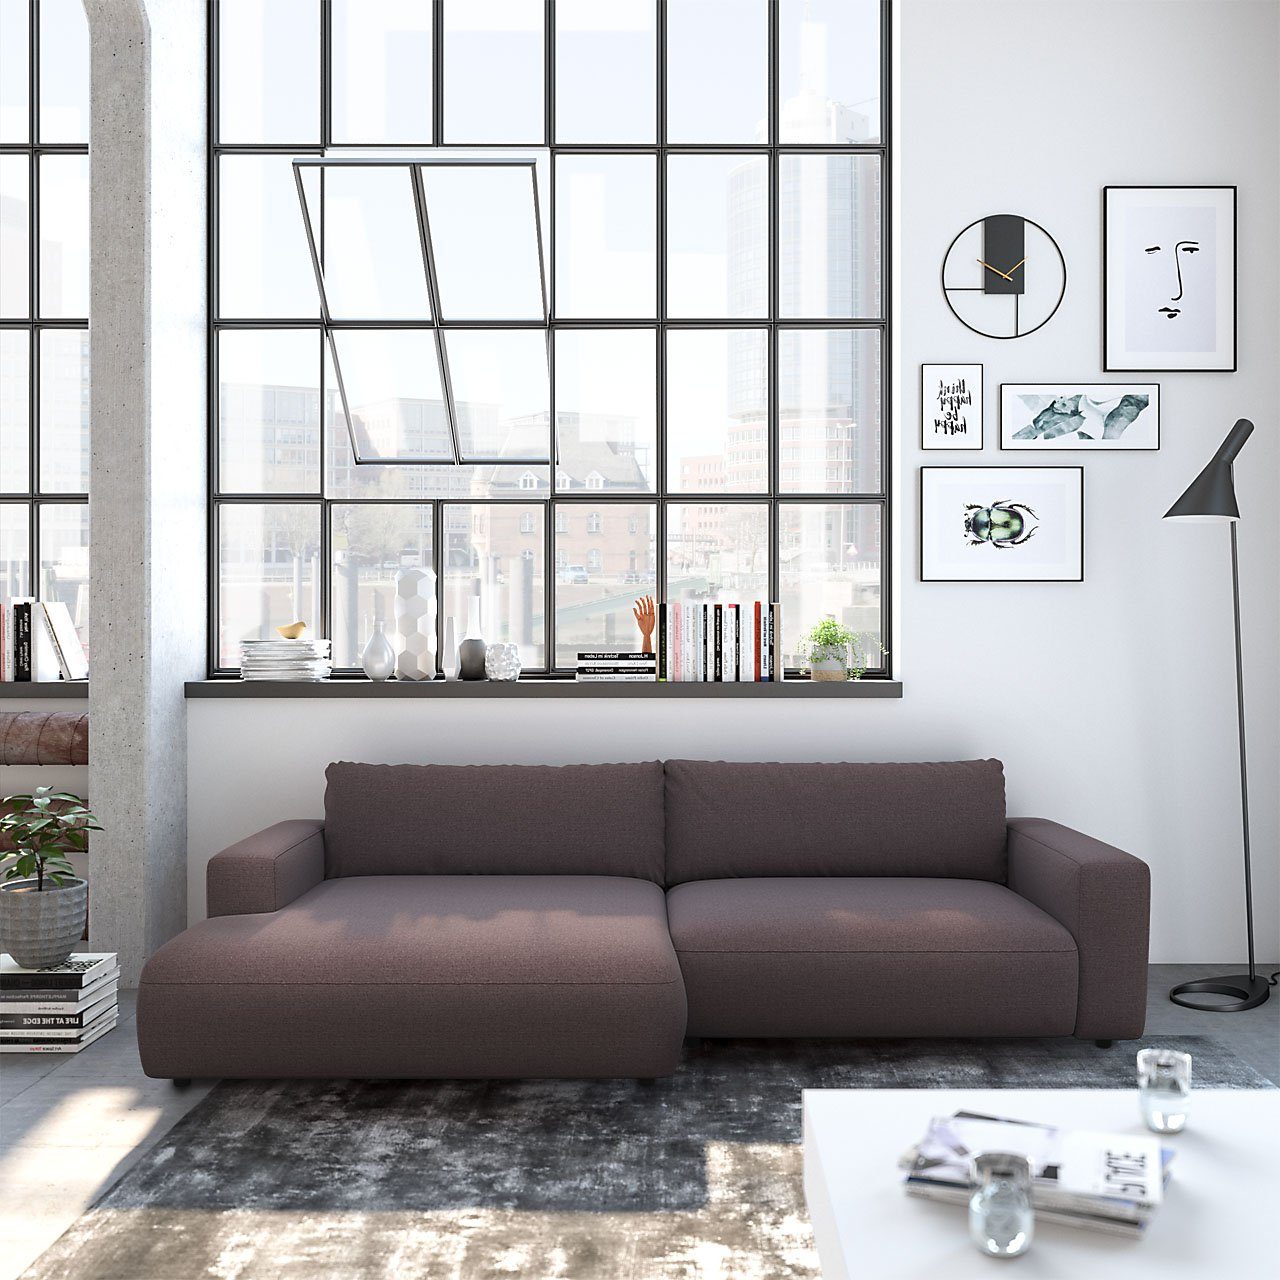 Ecksofa M GALLERY by Musterring branded LUCIA